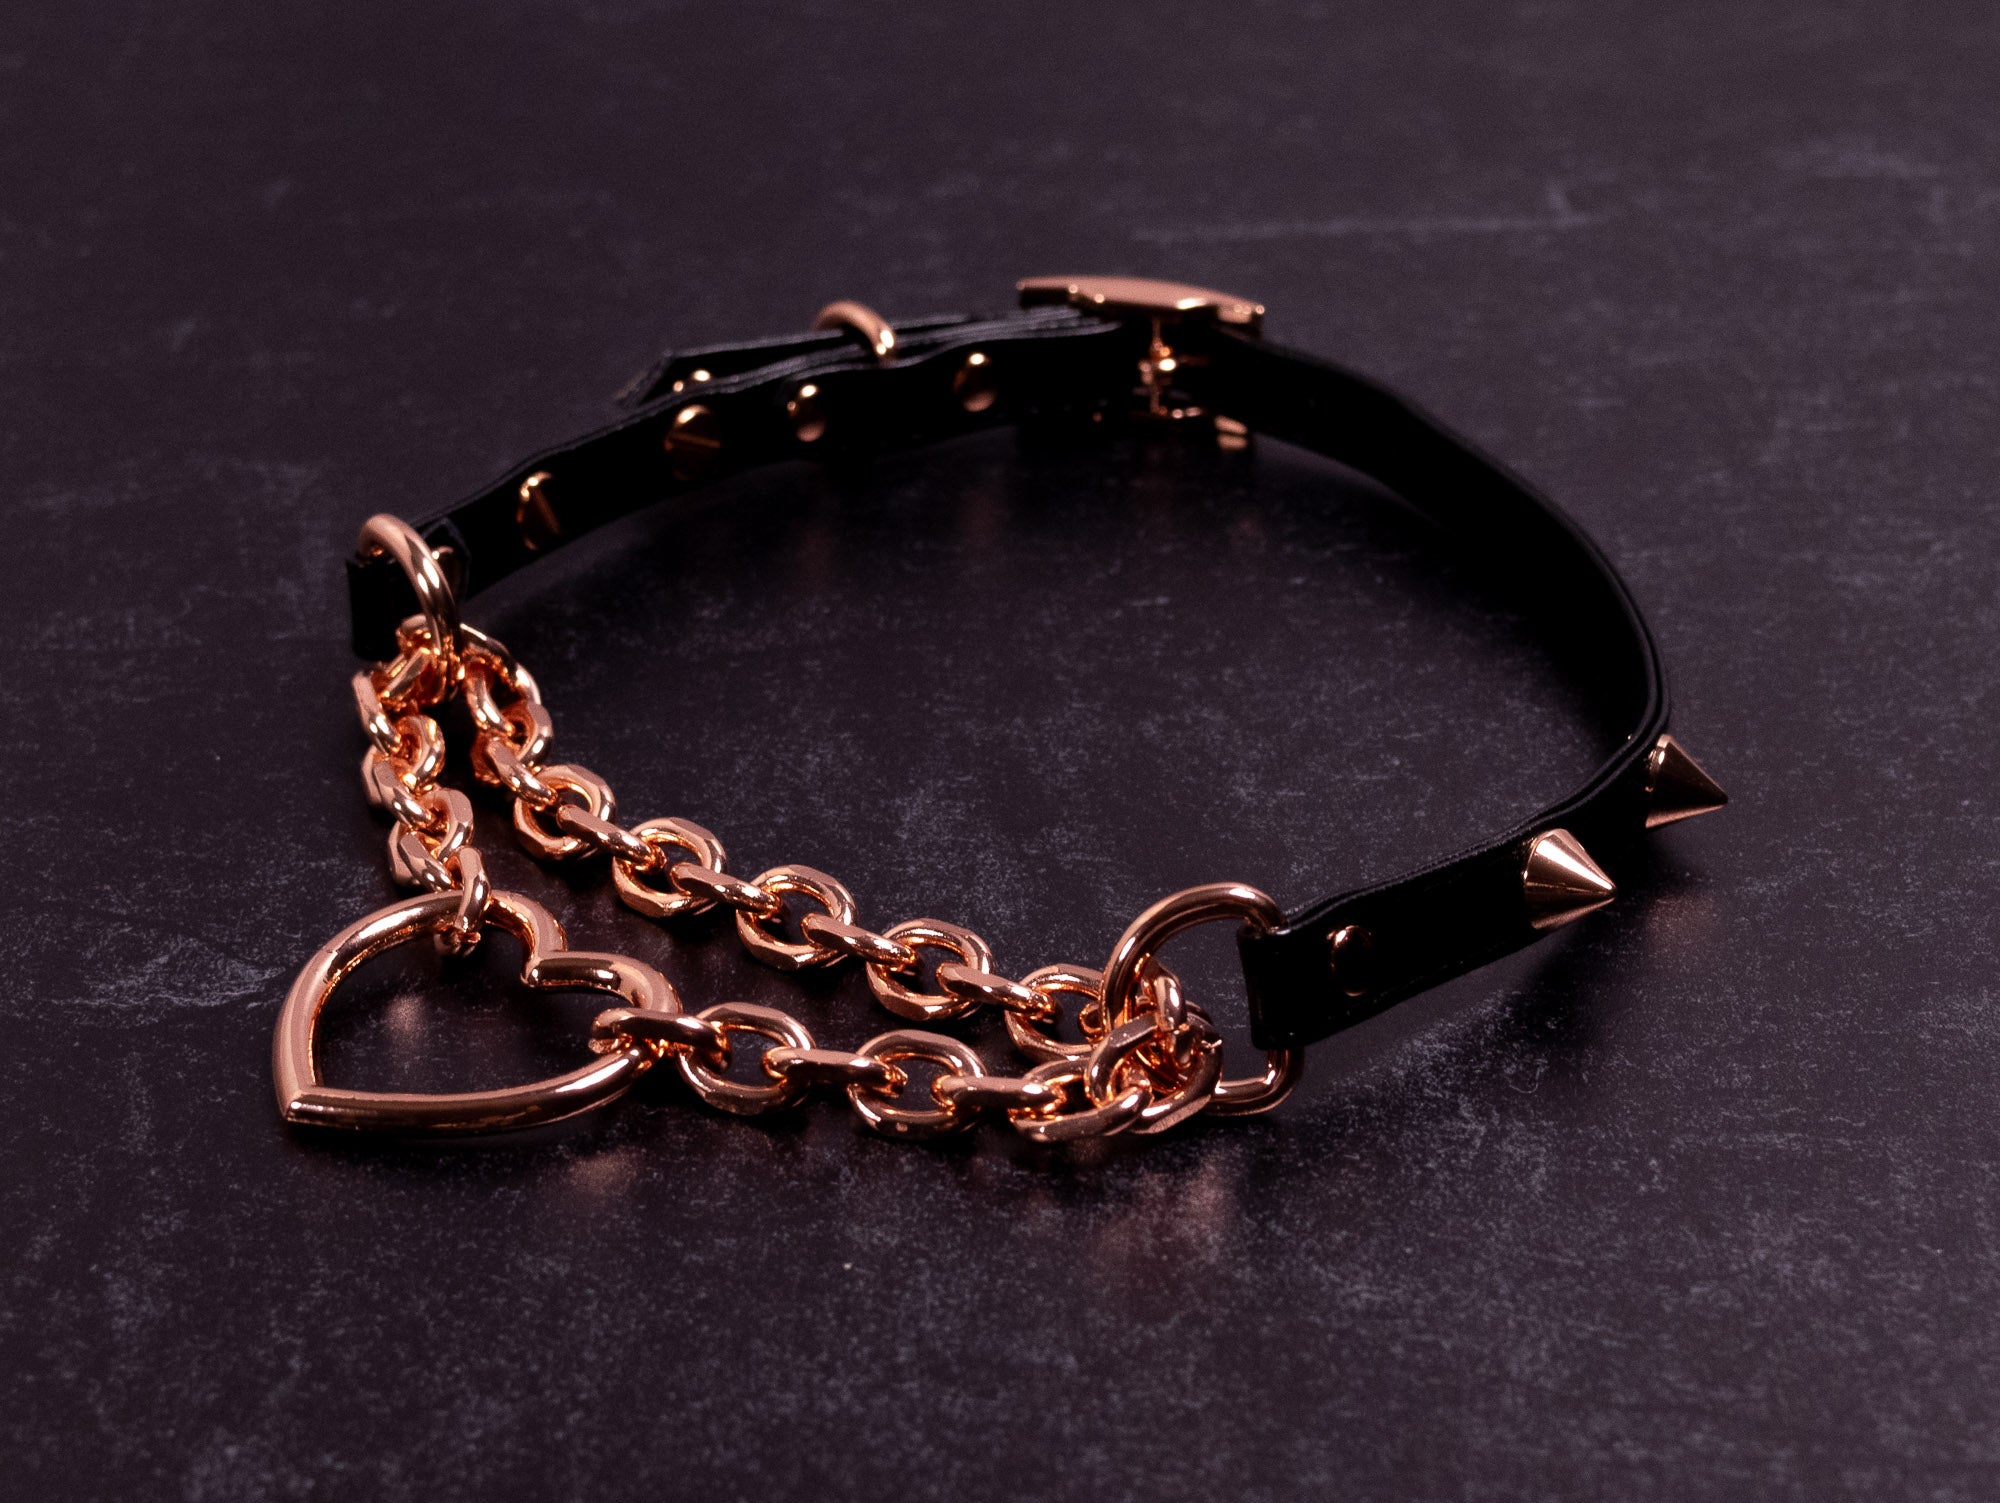 Spiked Heart Ring Black Vegan Leather Martingale Collar